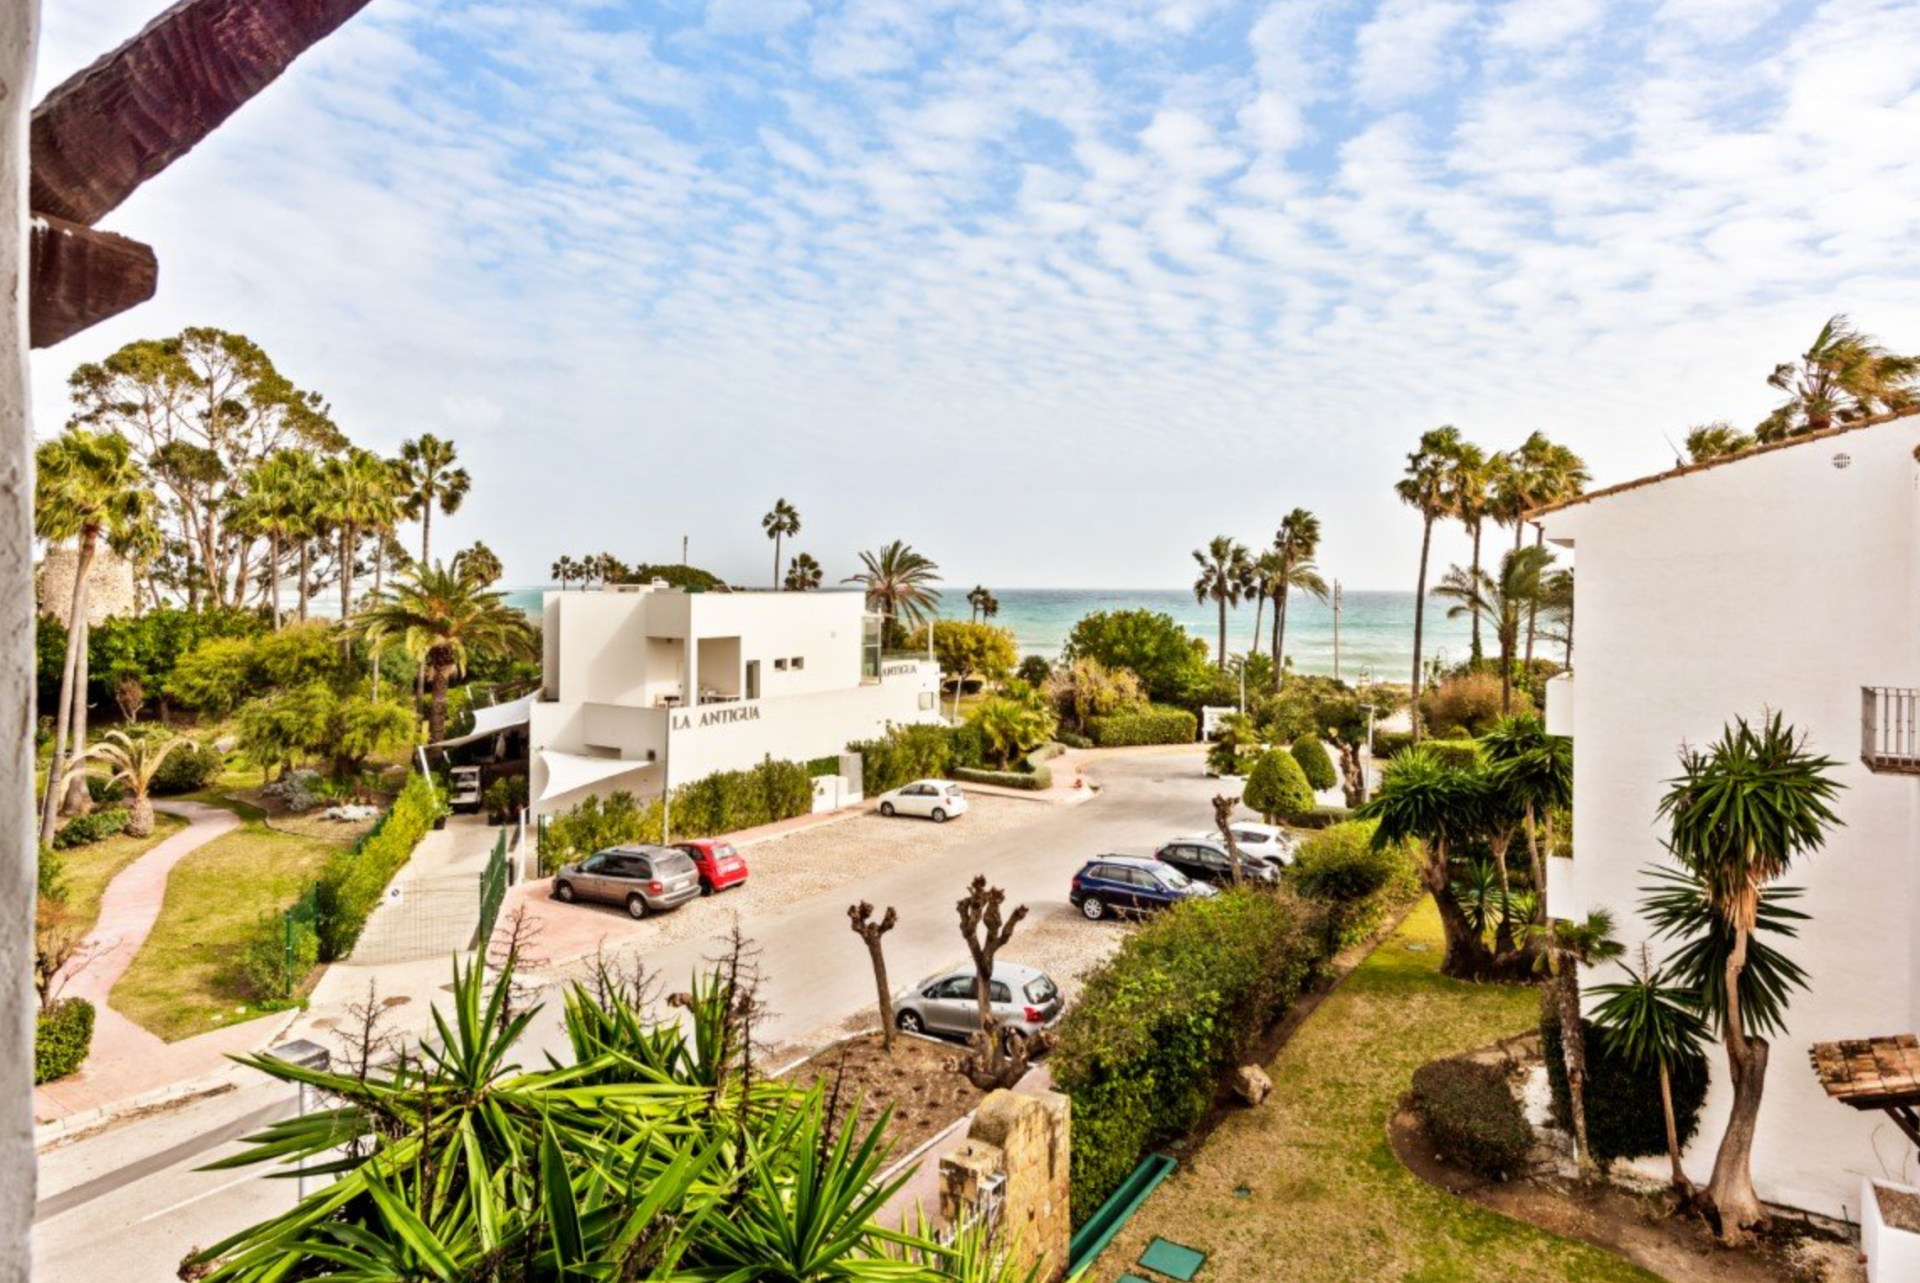 Wonderful penthouse with sea views set in the private complex of Costalita next to the beach